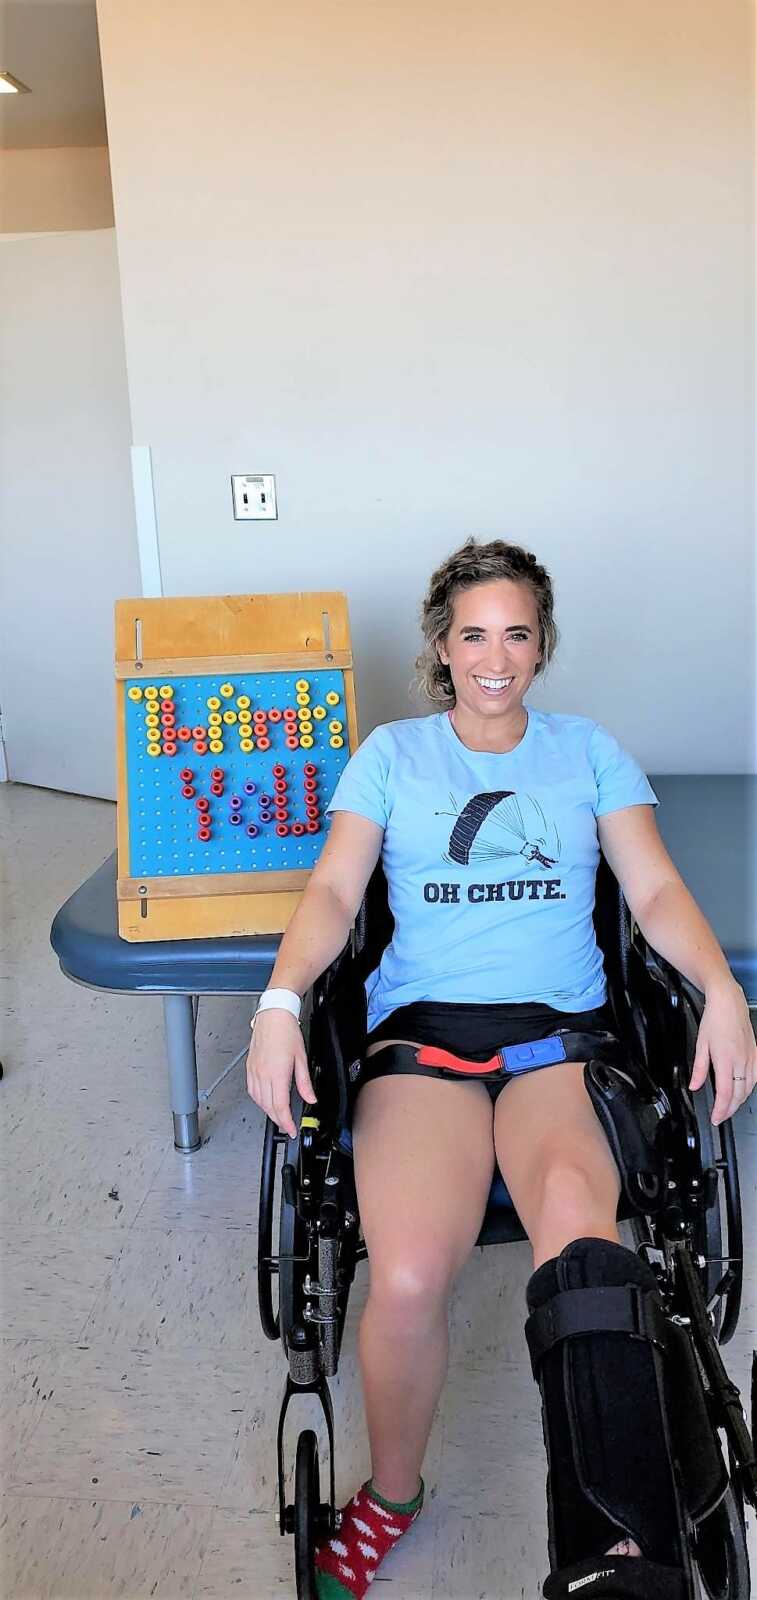 Young woman sitting in a wheelchair with a char that says "OH CHUTE" and a sign that says "THANK YOU"